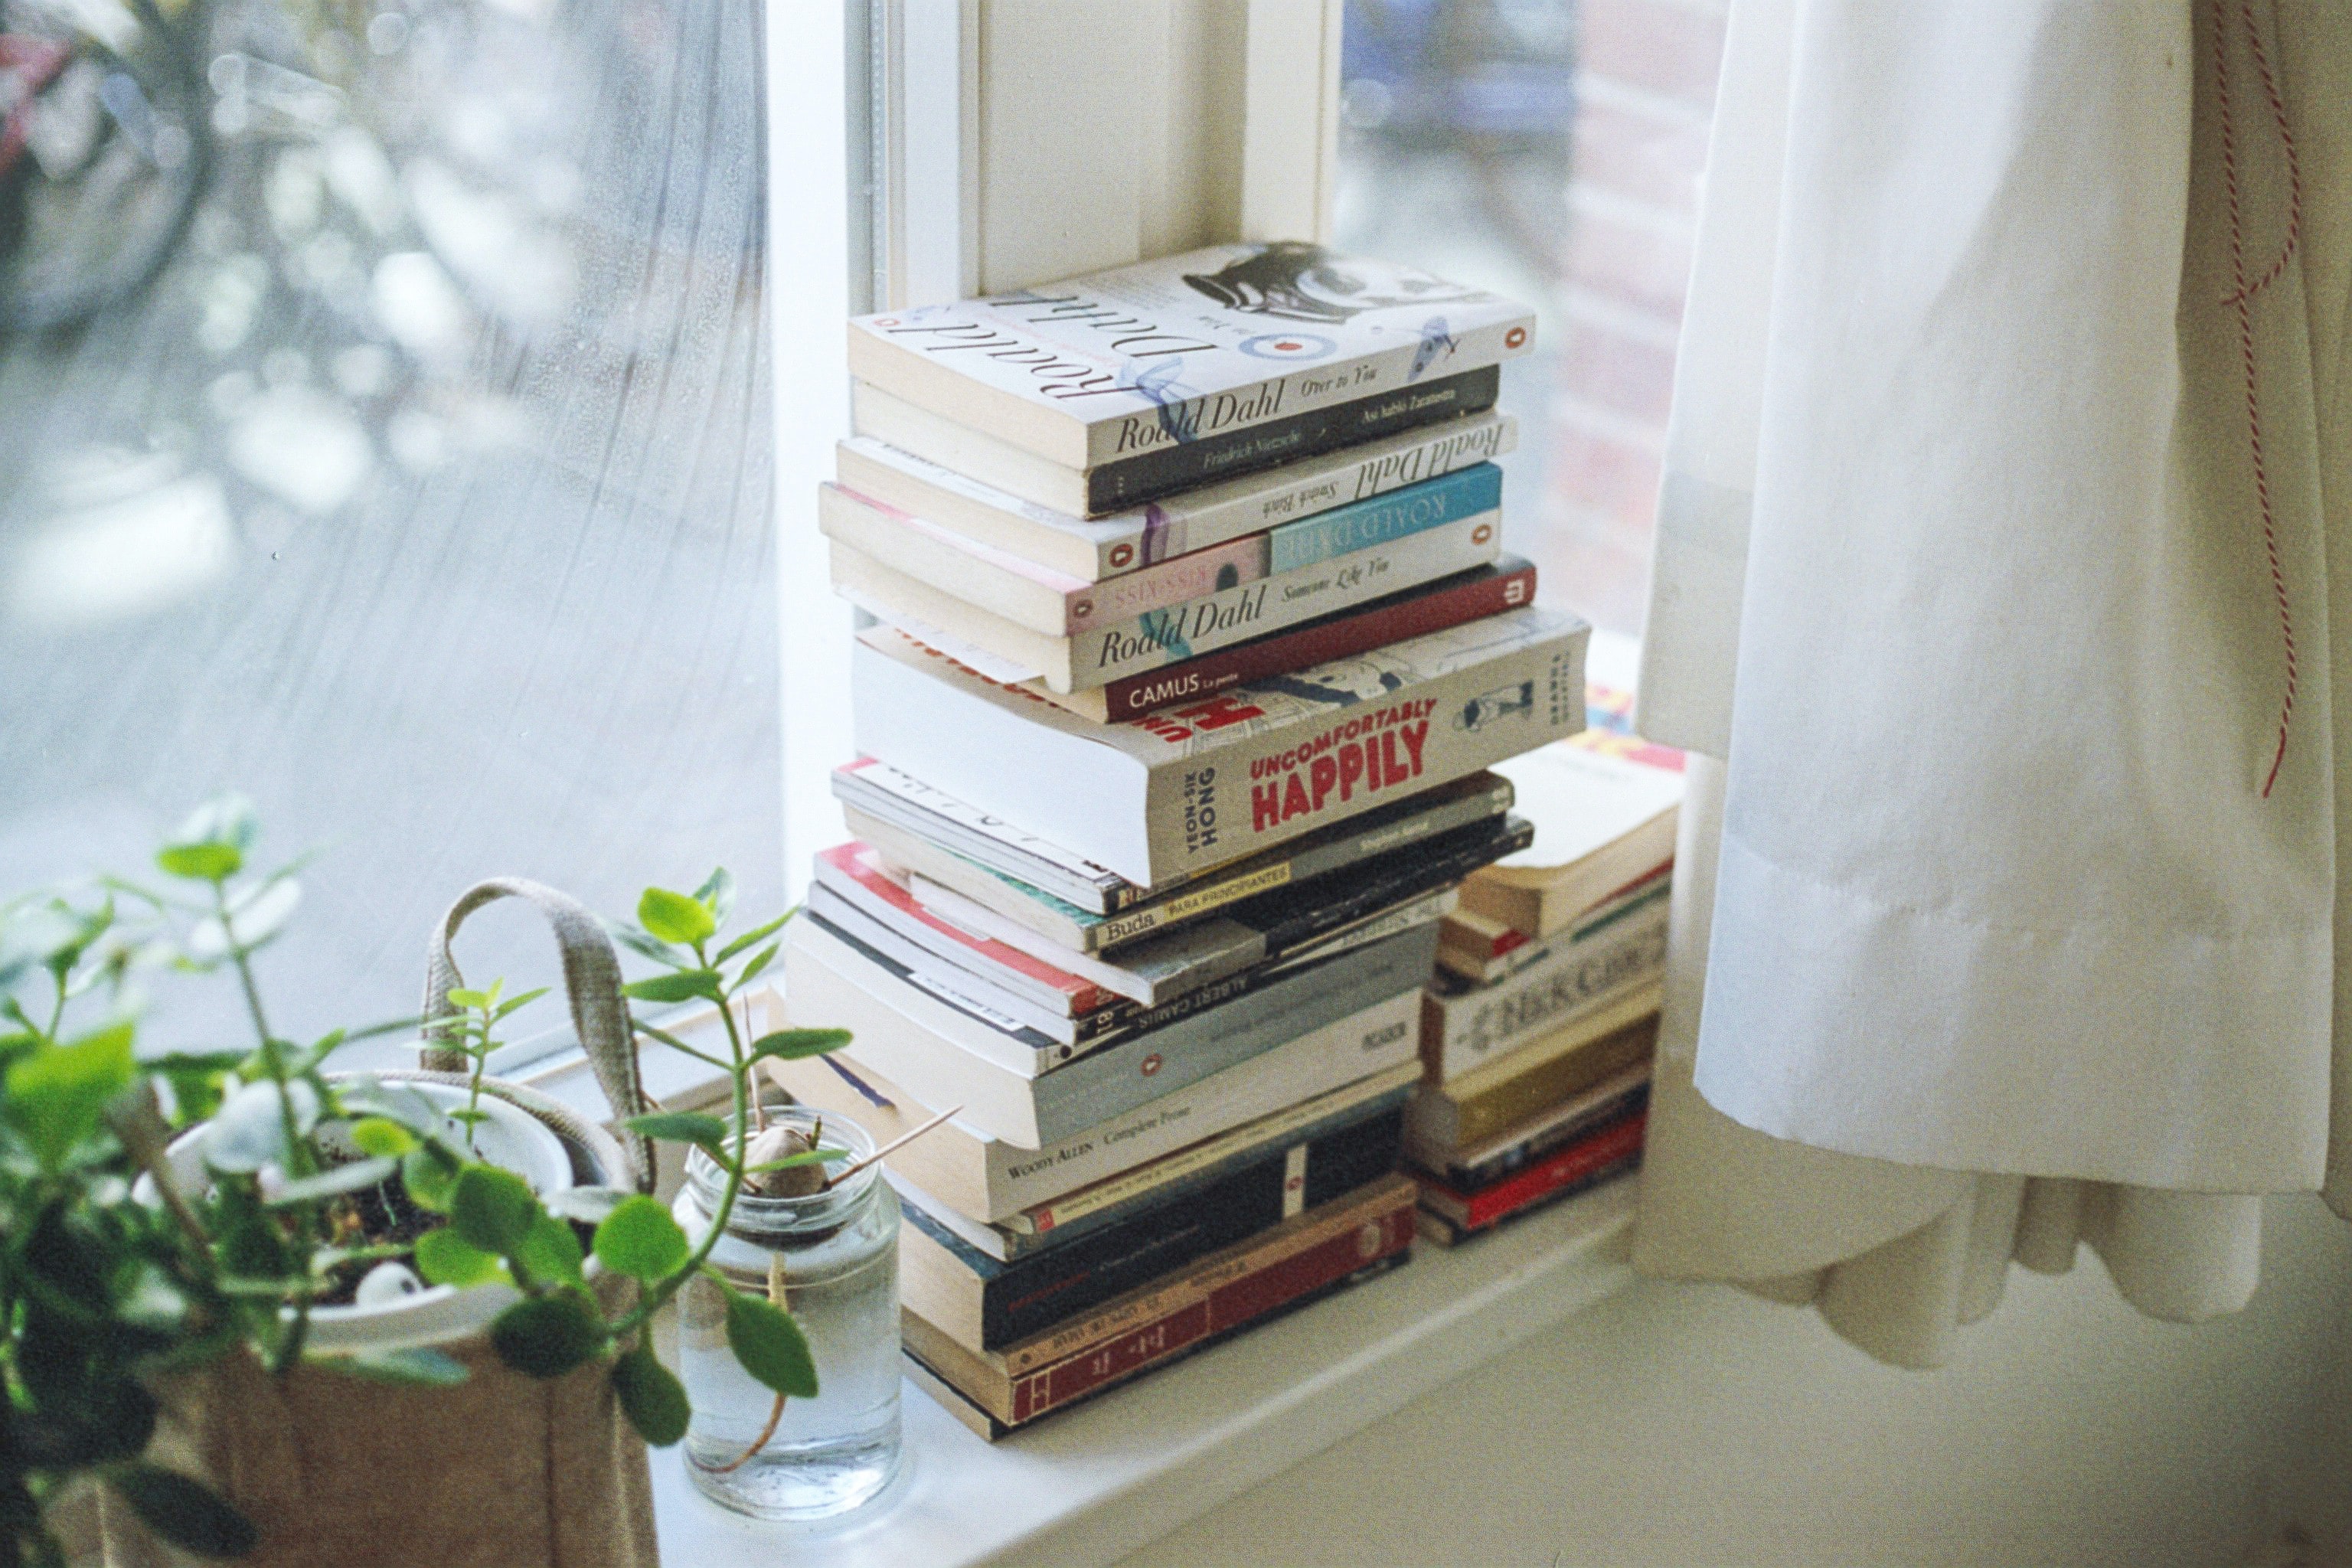 A stack of books sits in a window in the sunshine, with a houseplant adjacent and sheer white curtains.